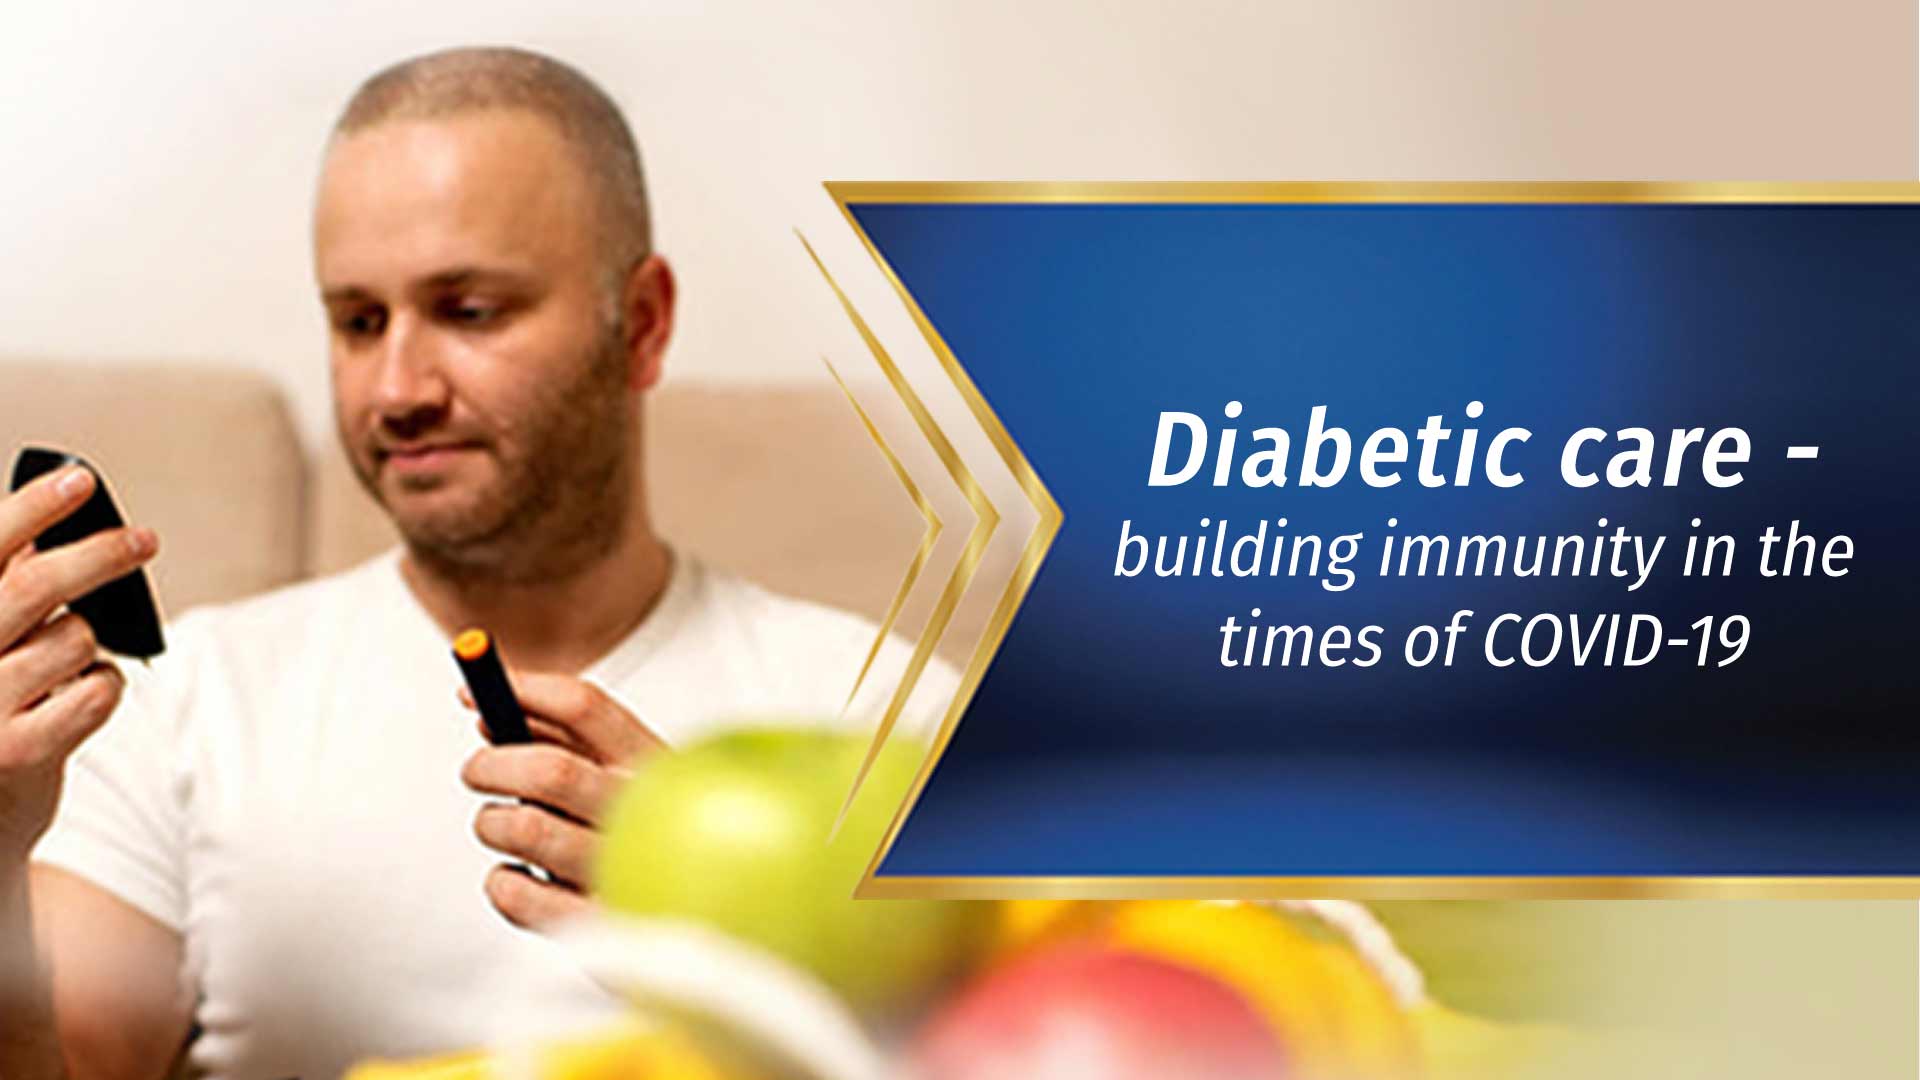 Diabetic care - building immunity in the times of COVID-19